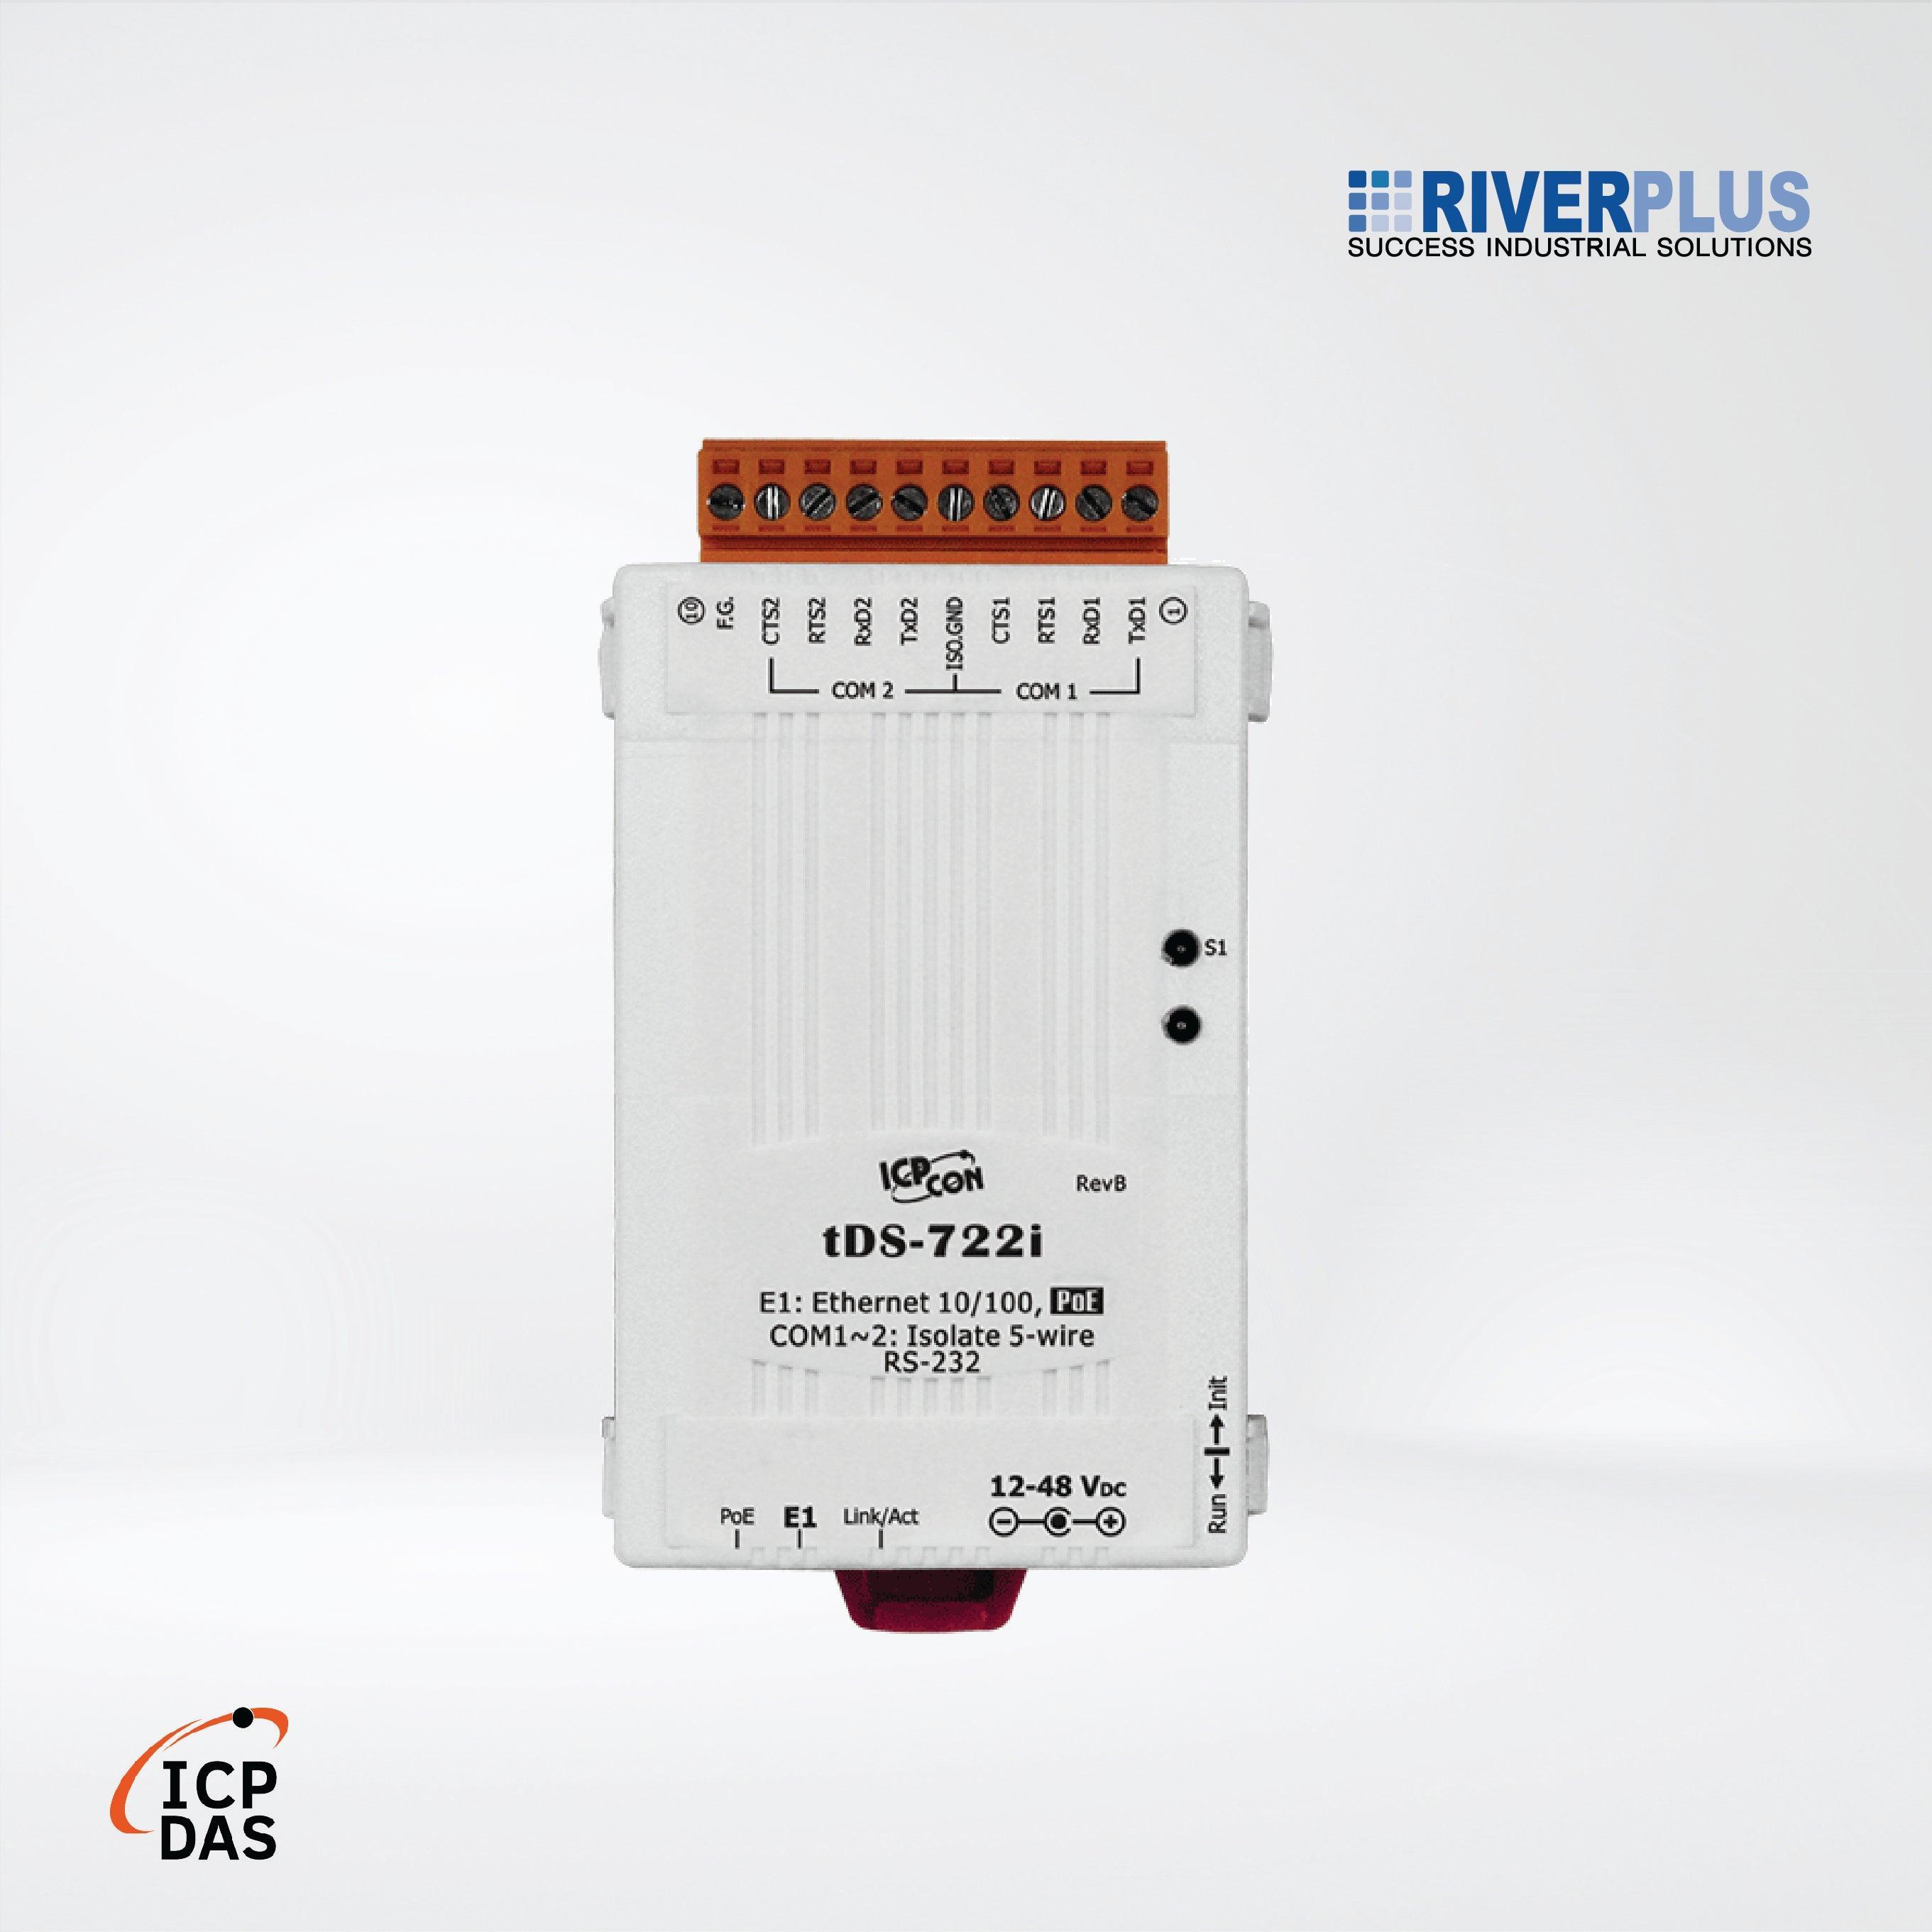 tDS-722i CR Tiny (2x RS-232) Serial-to-Ethernet Device Server with PoE - Riverplus